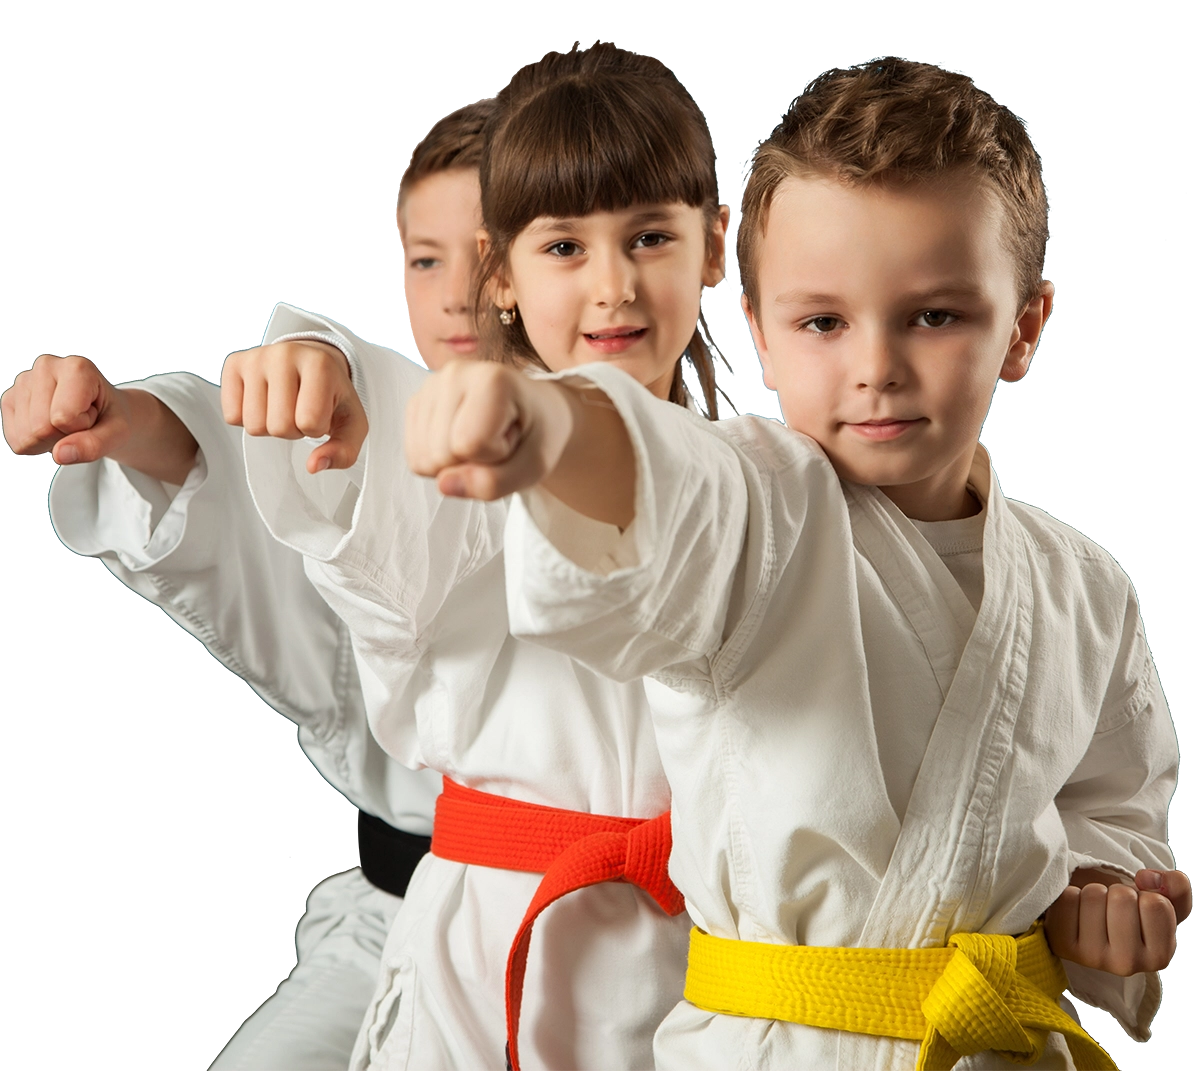 a boy with a yellow belt is pointing at the camera